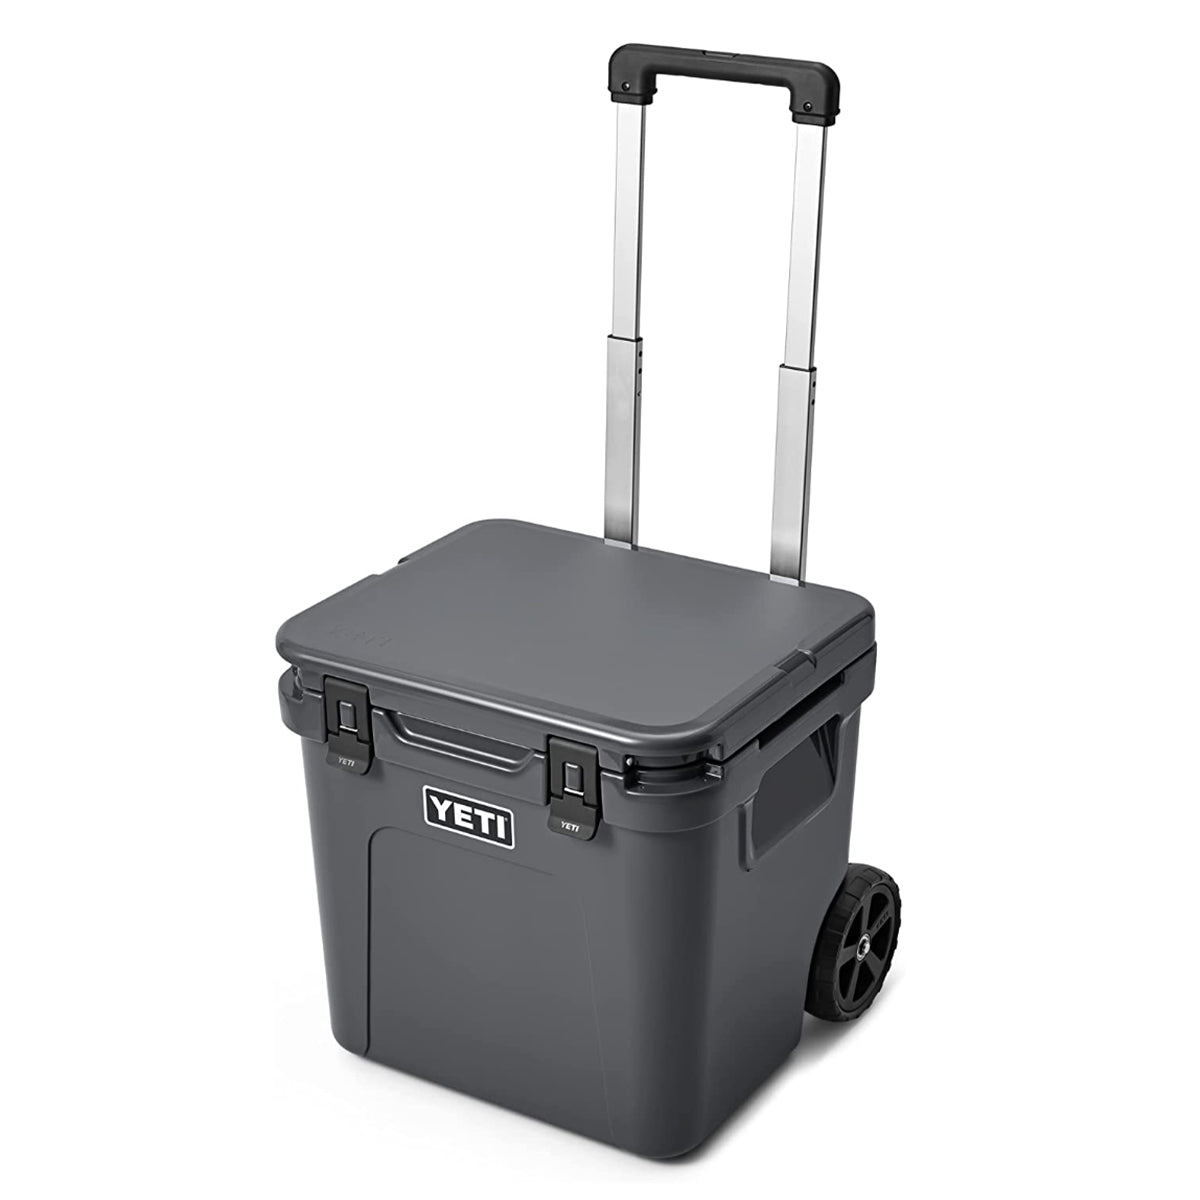 YETI Coolers Discounts, Military, First Responders